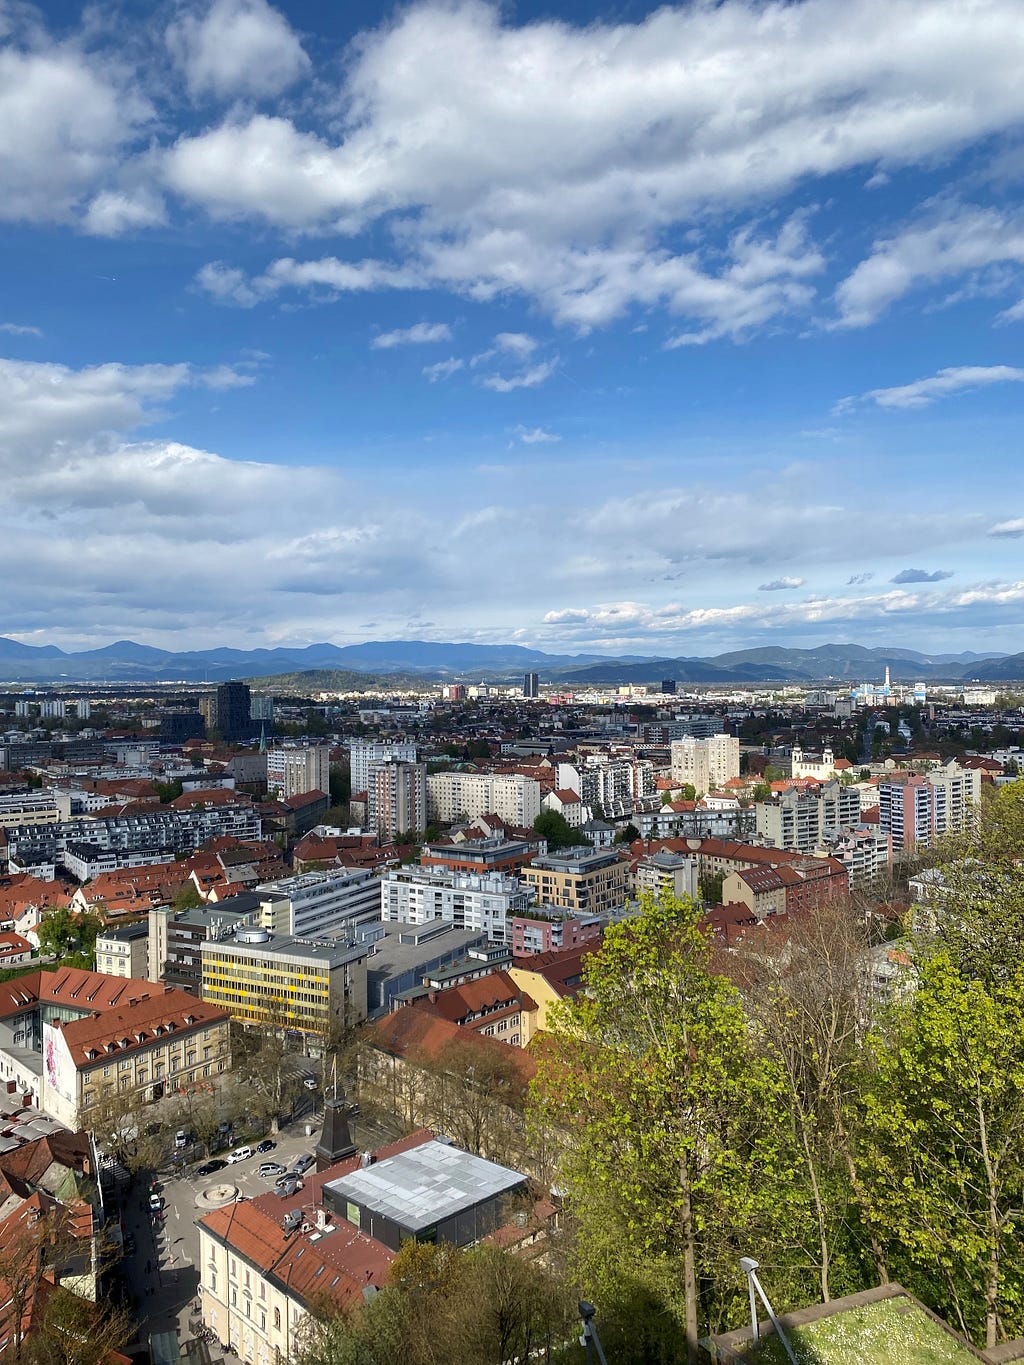 Panoramic view of Ljubljana from the castle taken by the author